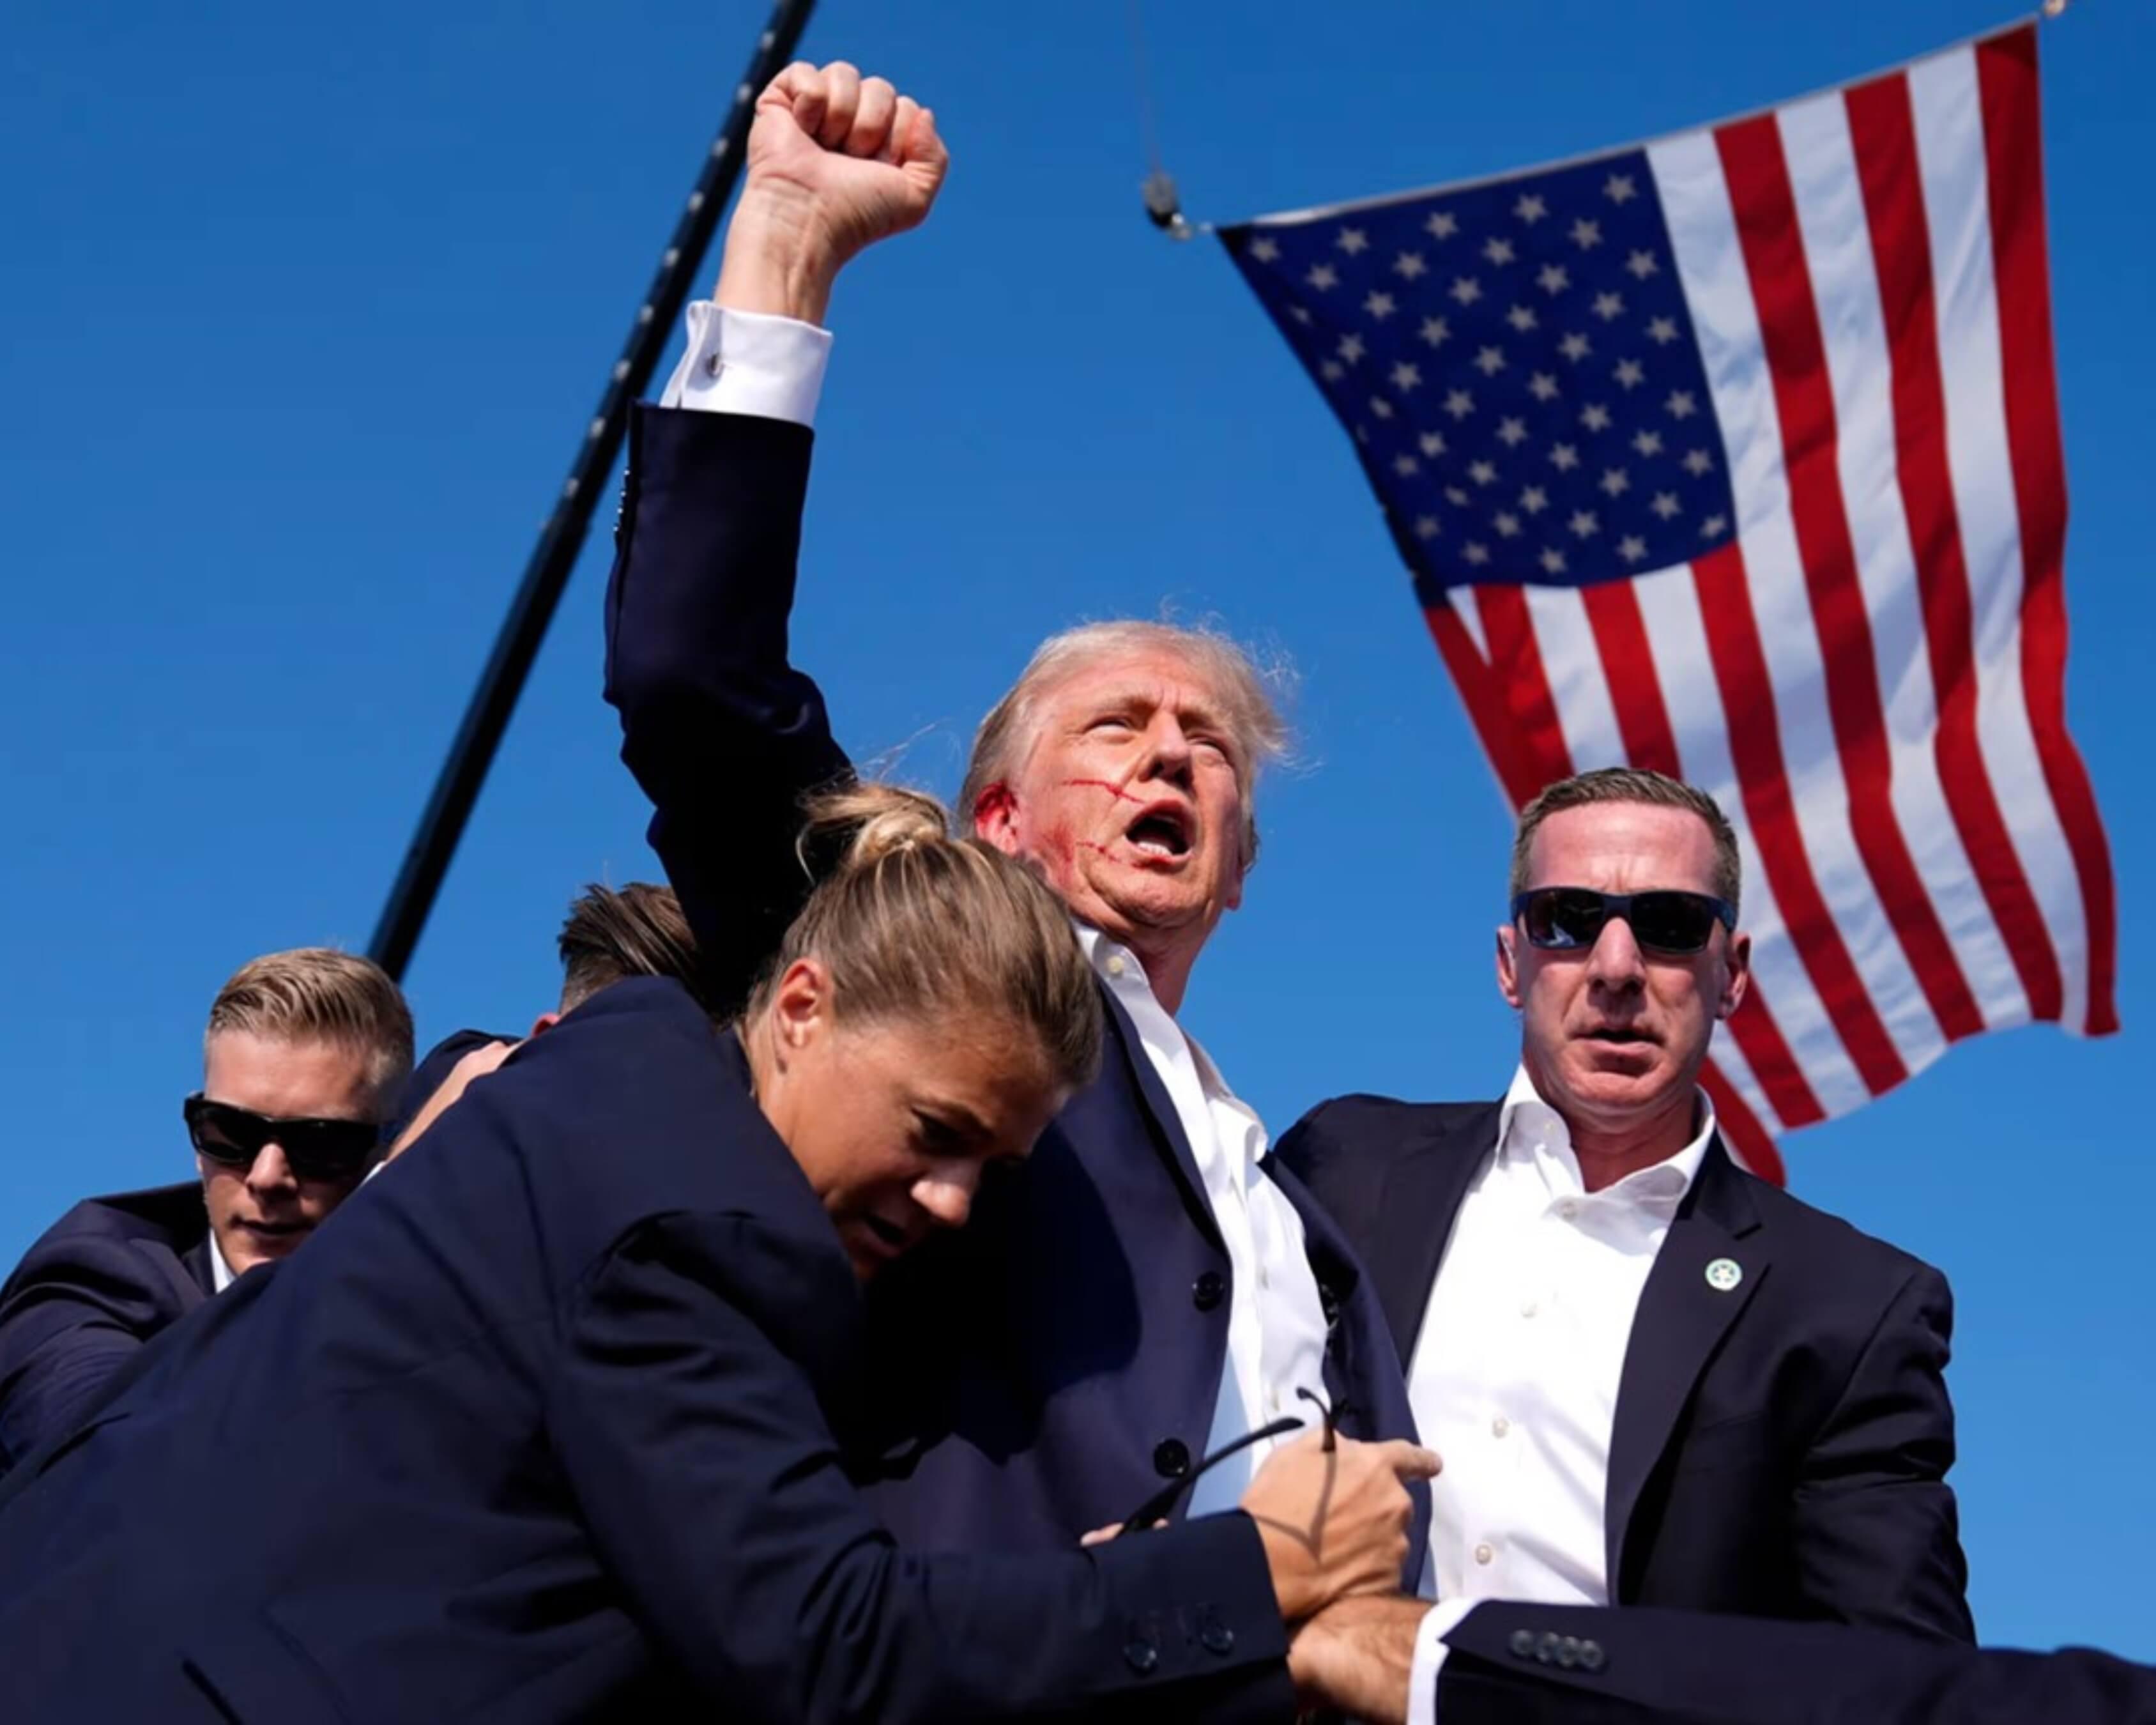 Trump Assassination Picture: An Iconic Image is Born